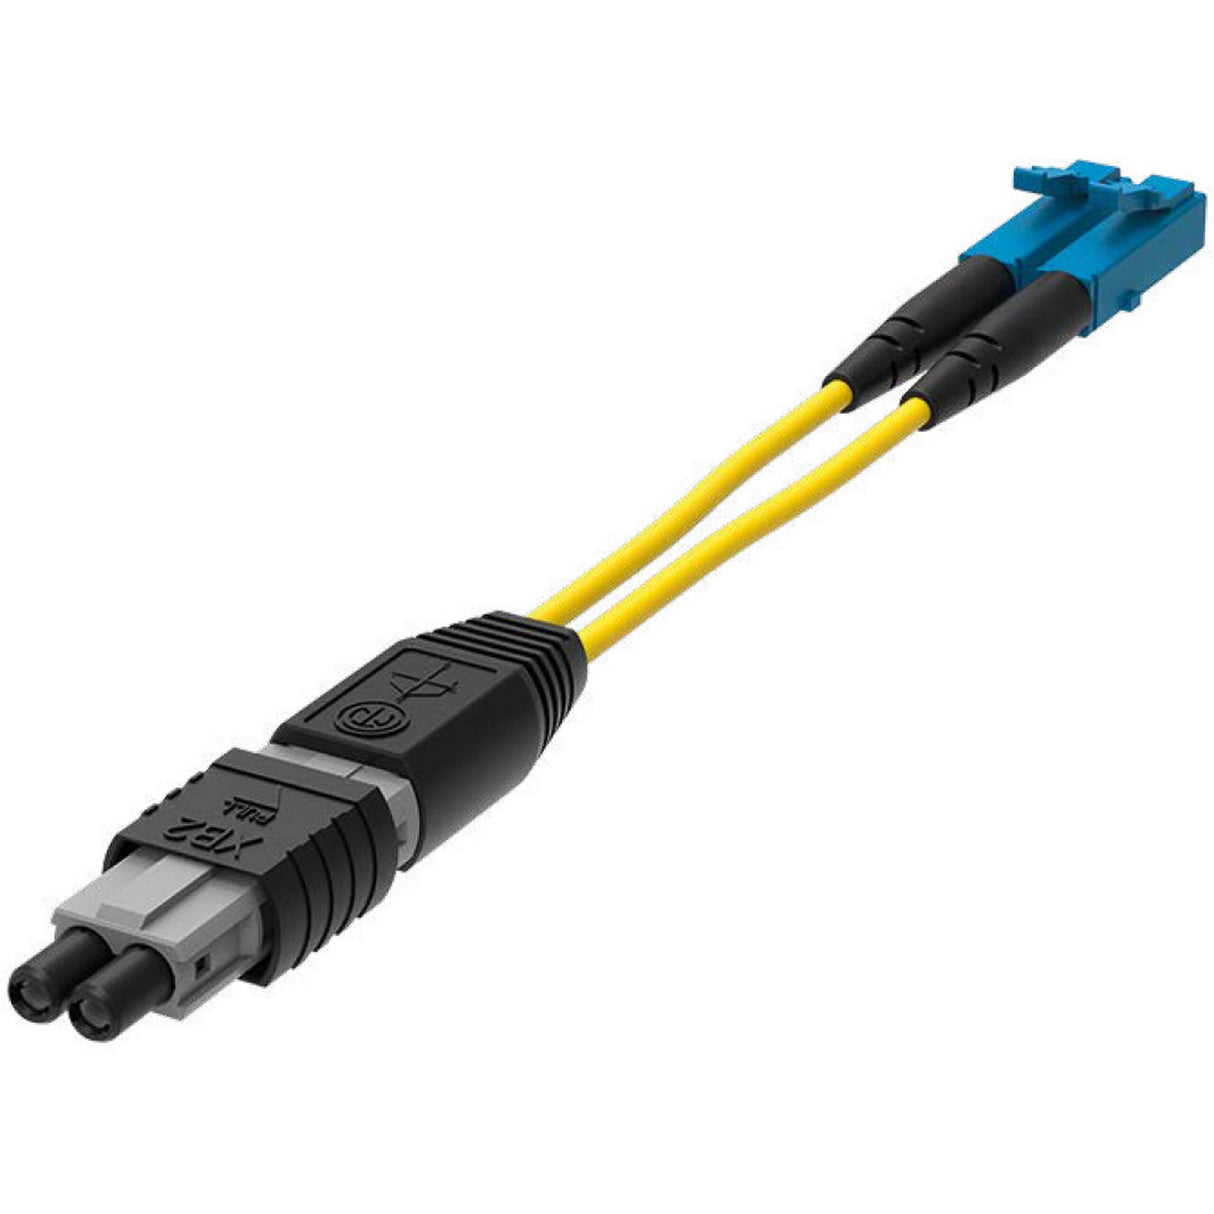 Neutrik NKOBF2S-XP-0-1 opticalCON DRAGONFLY XB2 Female to LC Breakout Cable, 1-Meter